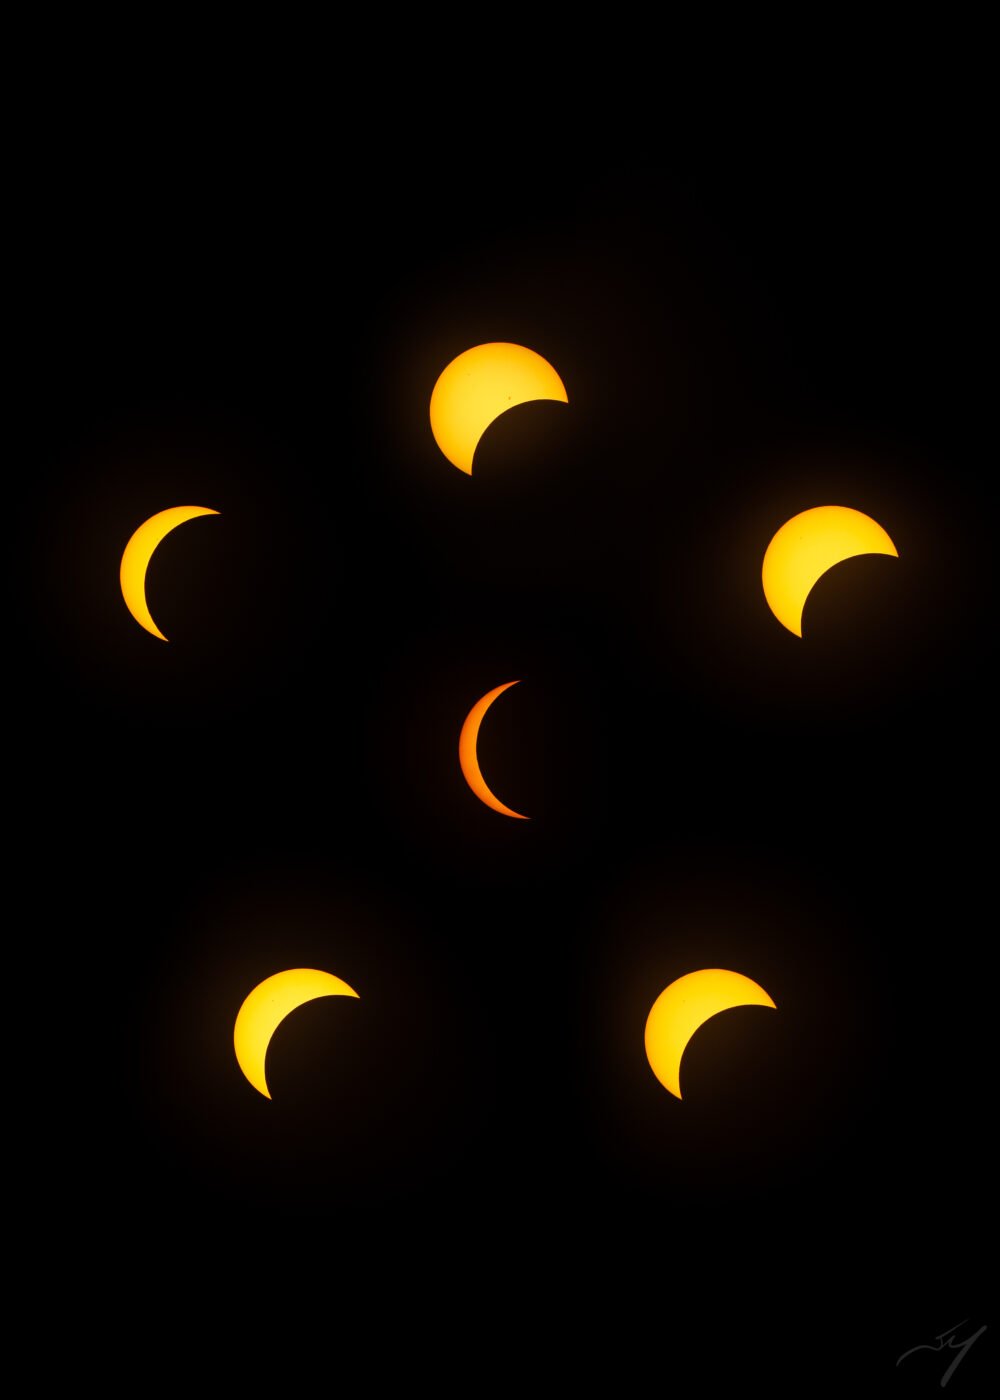 Six images of a partially-obscured sun during a solar eclipse, arranged in a pentagonal pattern with maximally-eclipsed sun crescent in the centre.